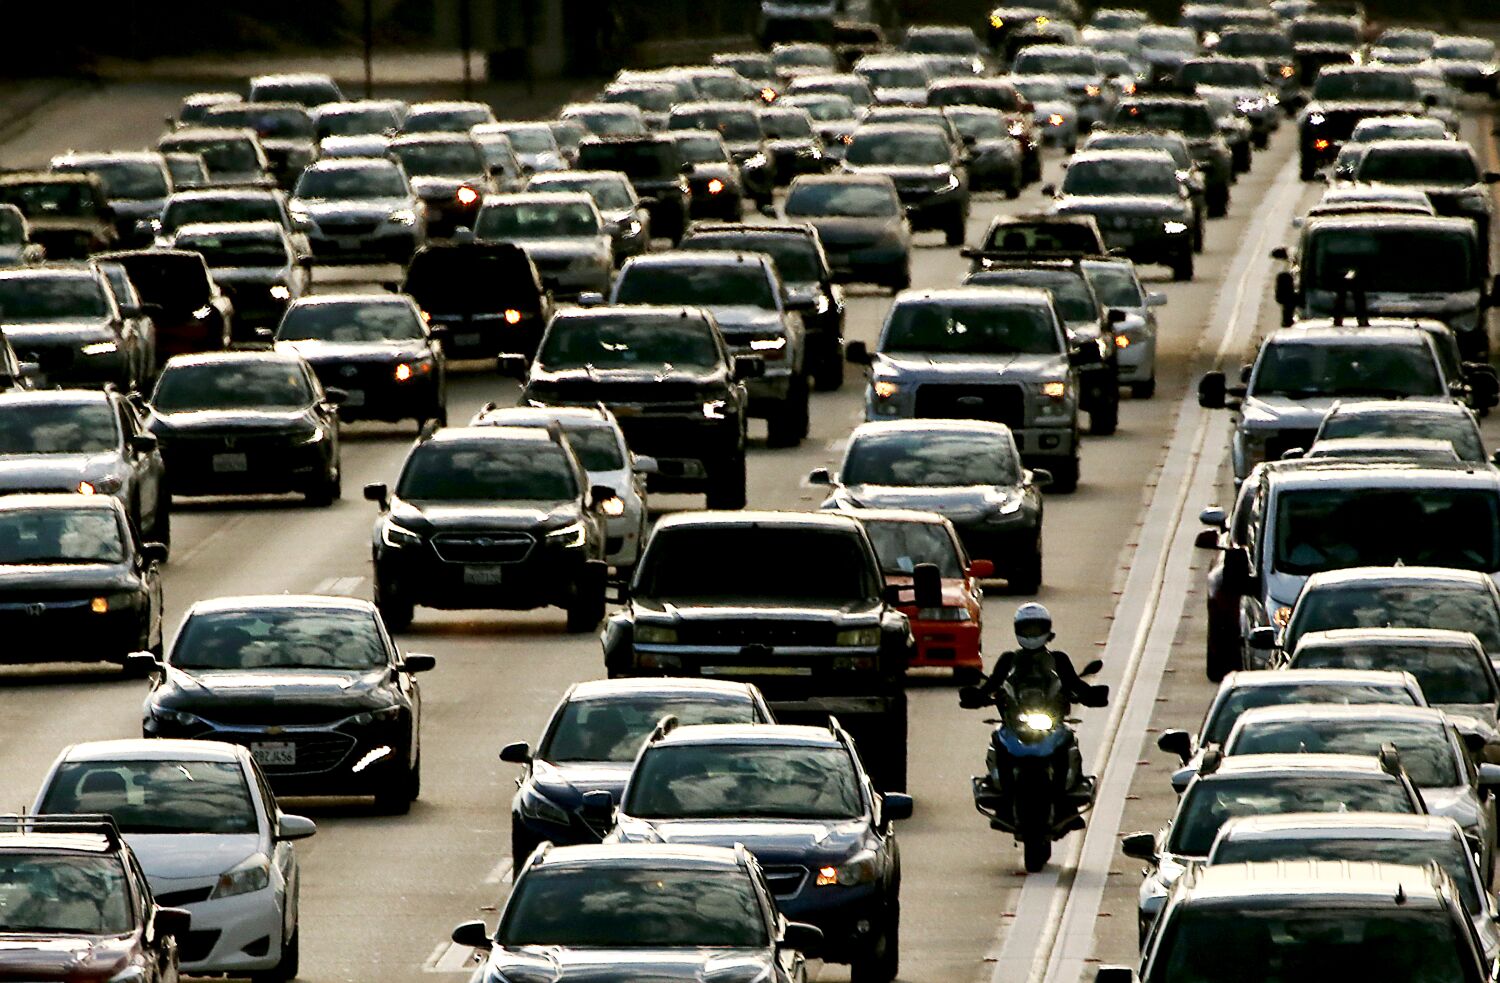 Traveling for Memorial Day weekend? You'll be sharing the road with nearly 3 million of your neighbors